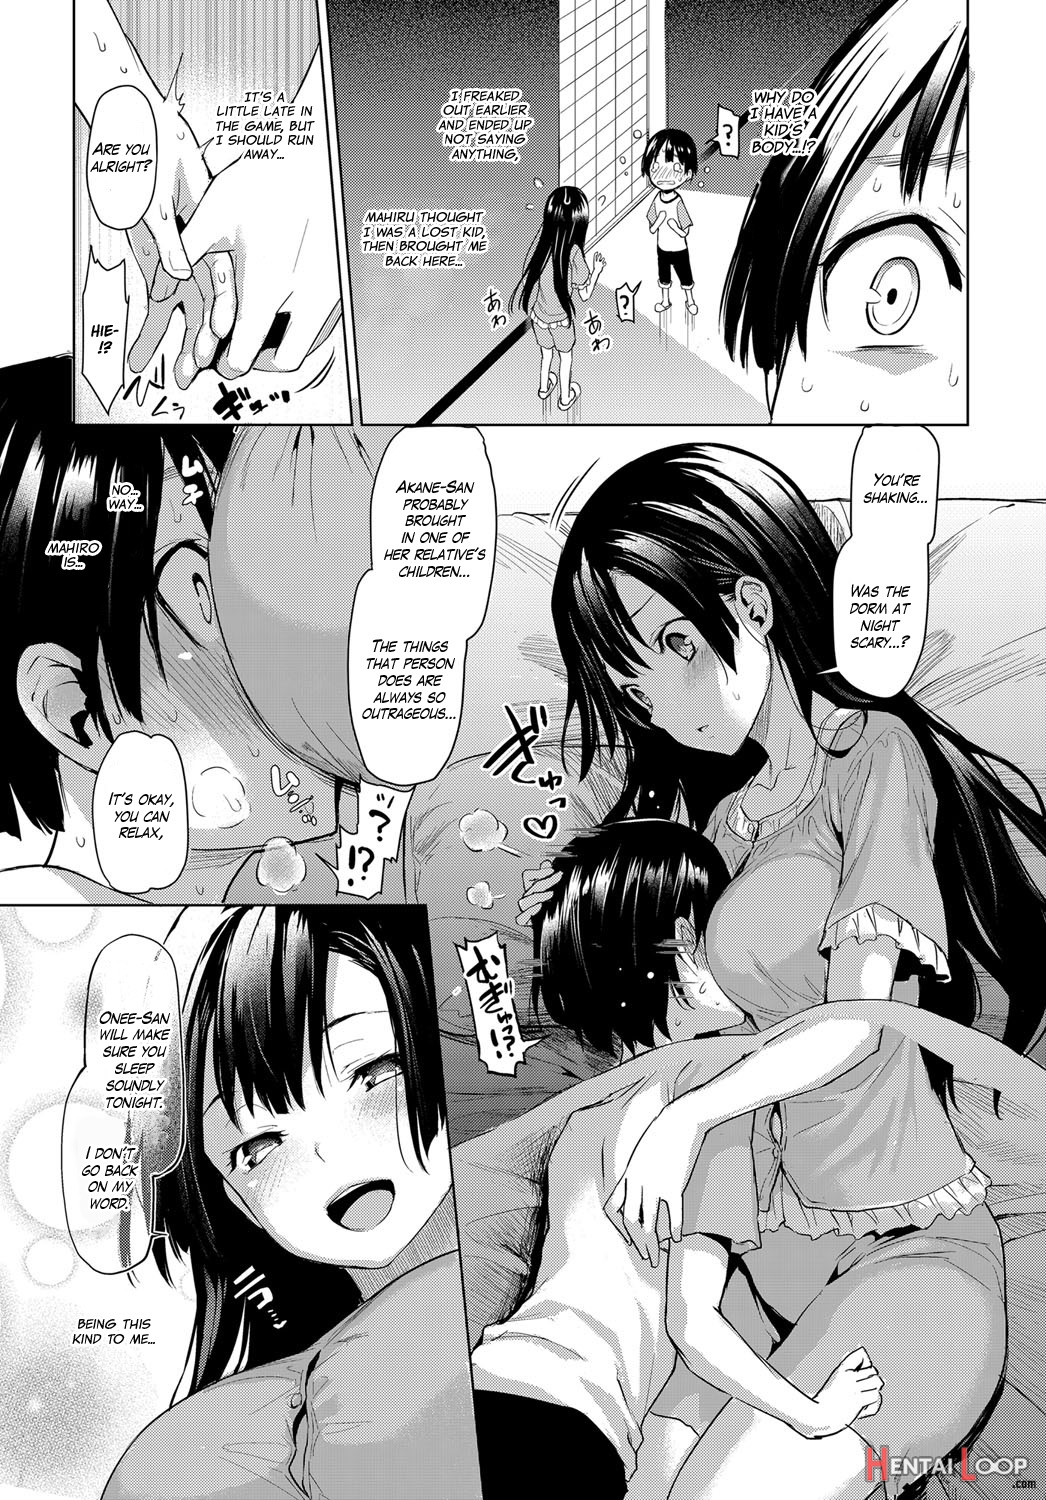 Older Sister Experience - The Girls' Dormitory page 11